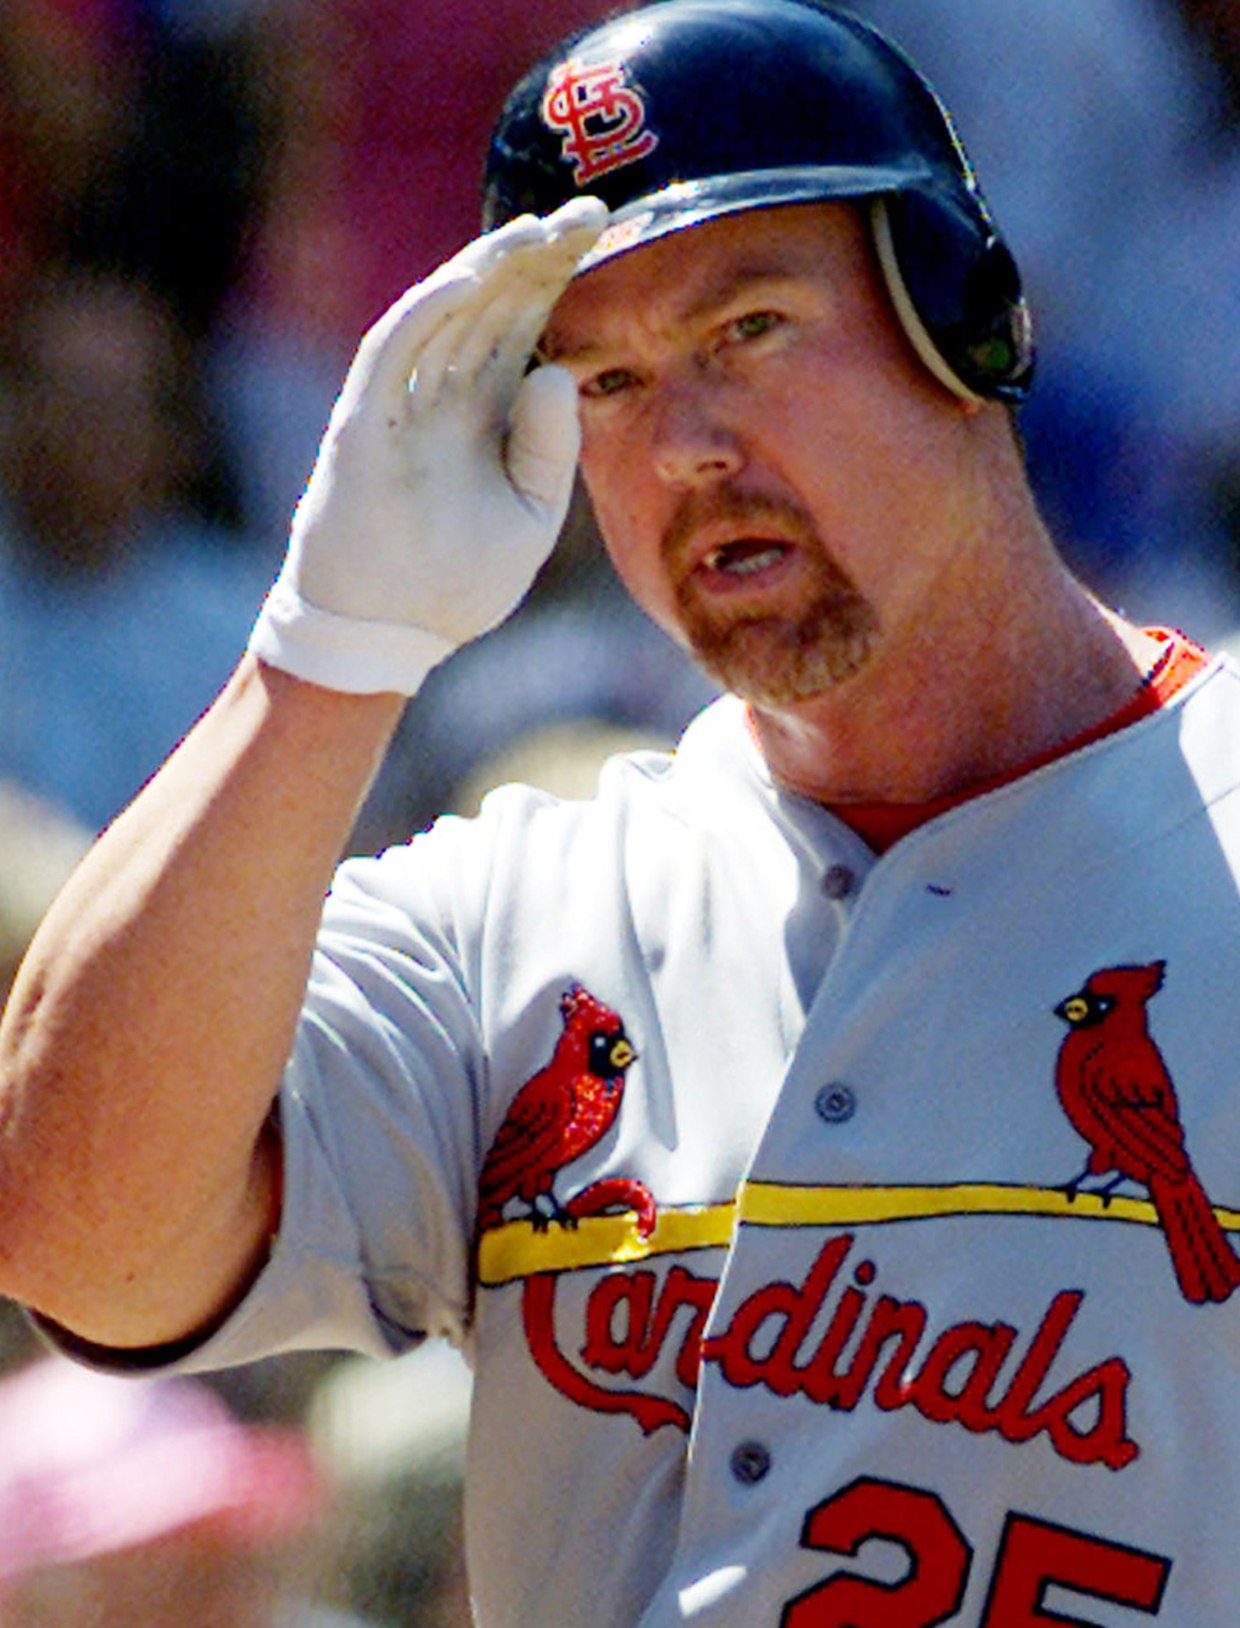 Baseball: Emotional McGwire admits to being juicer